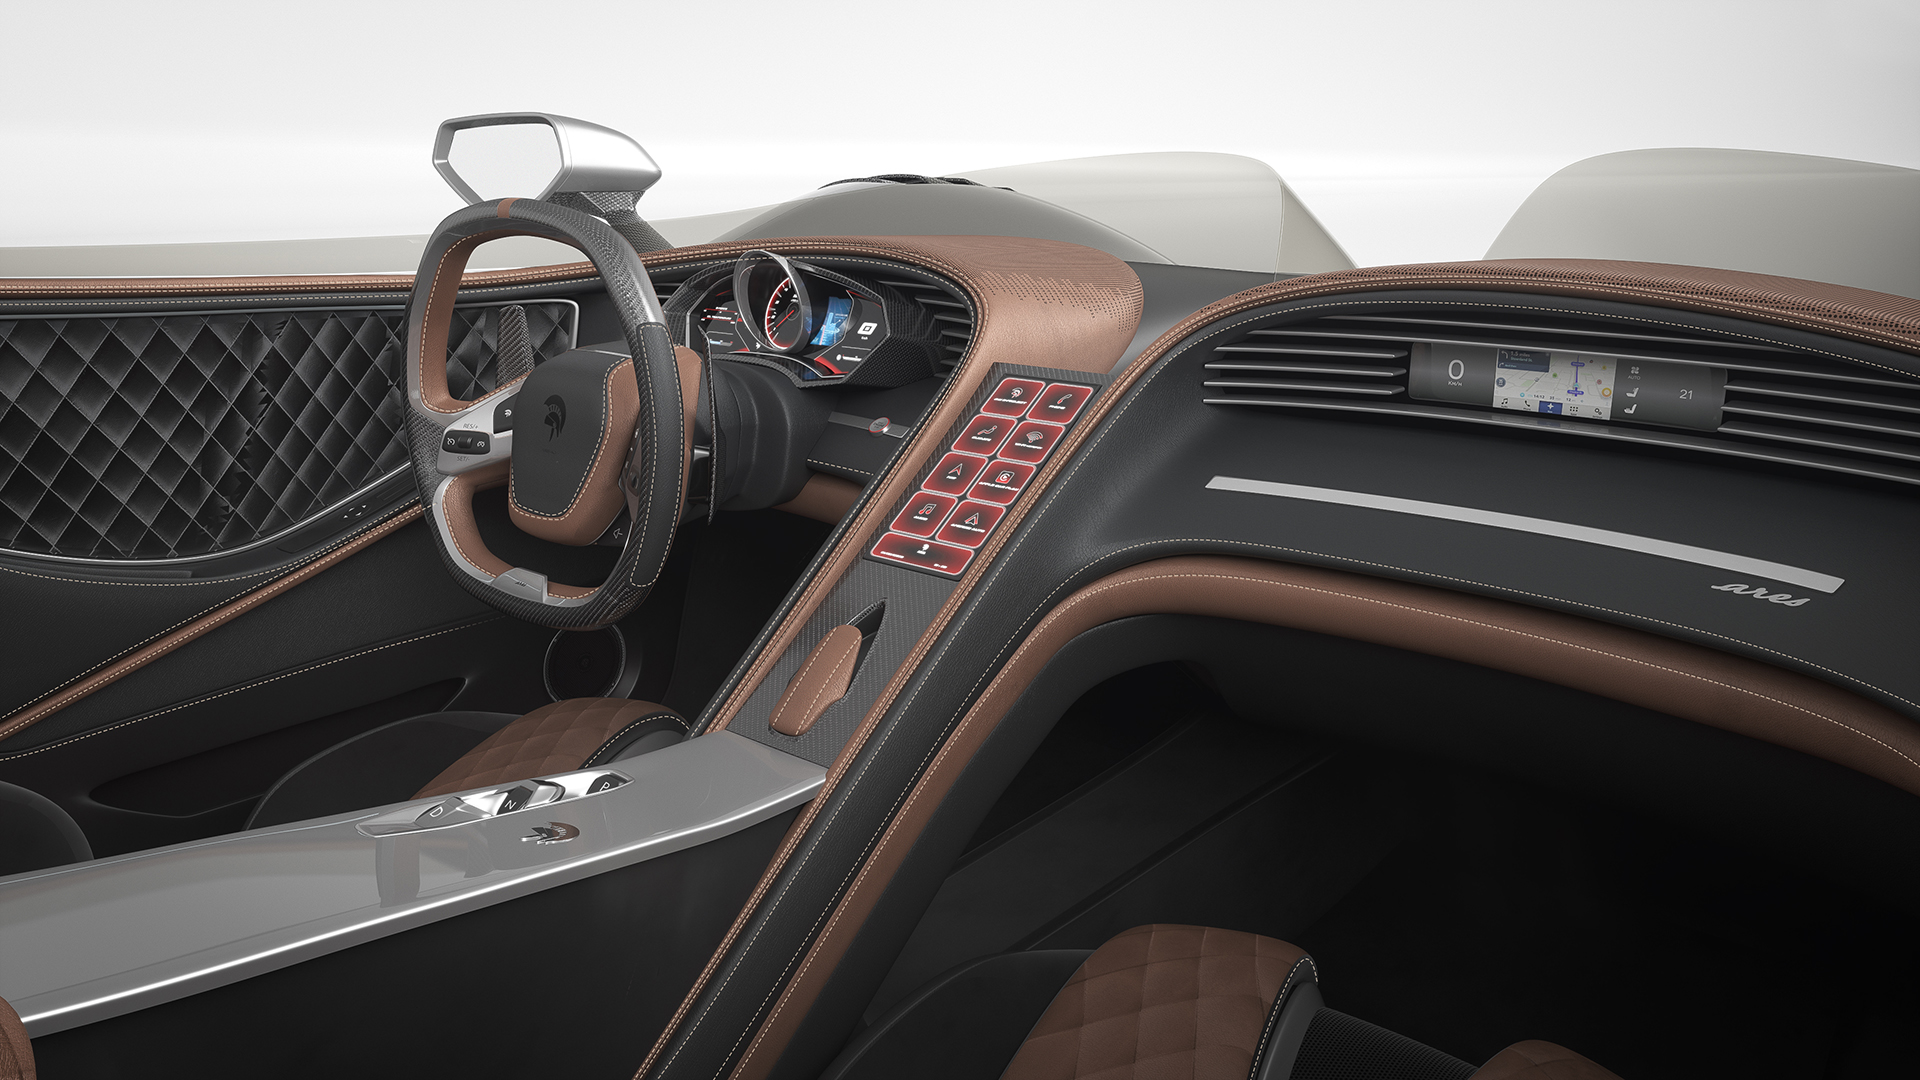 ARES S1 Project Spyder (2020) – Interior